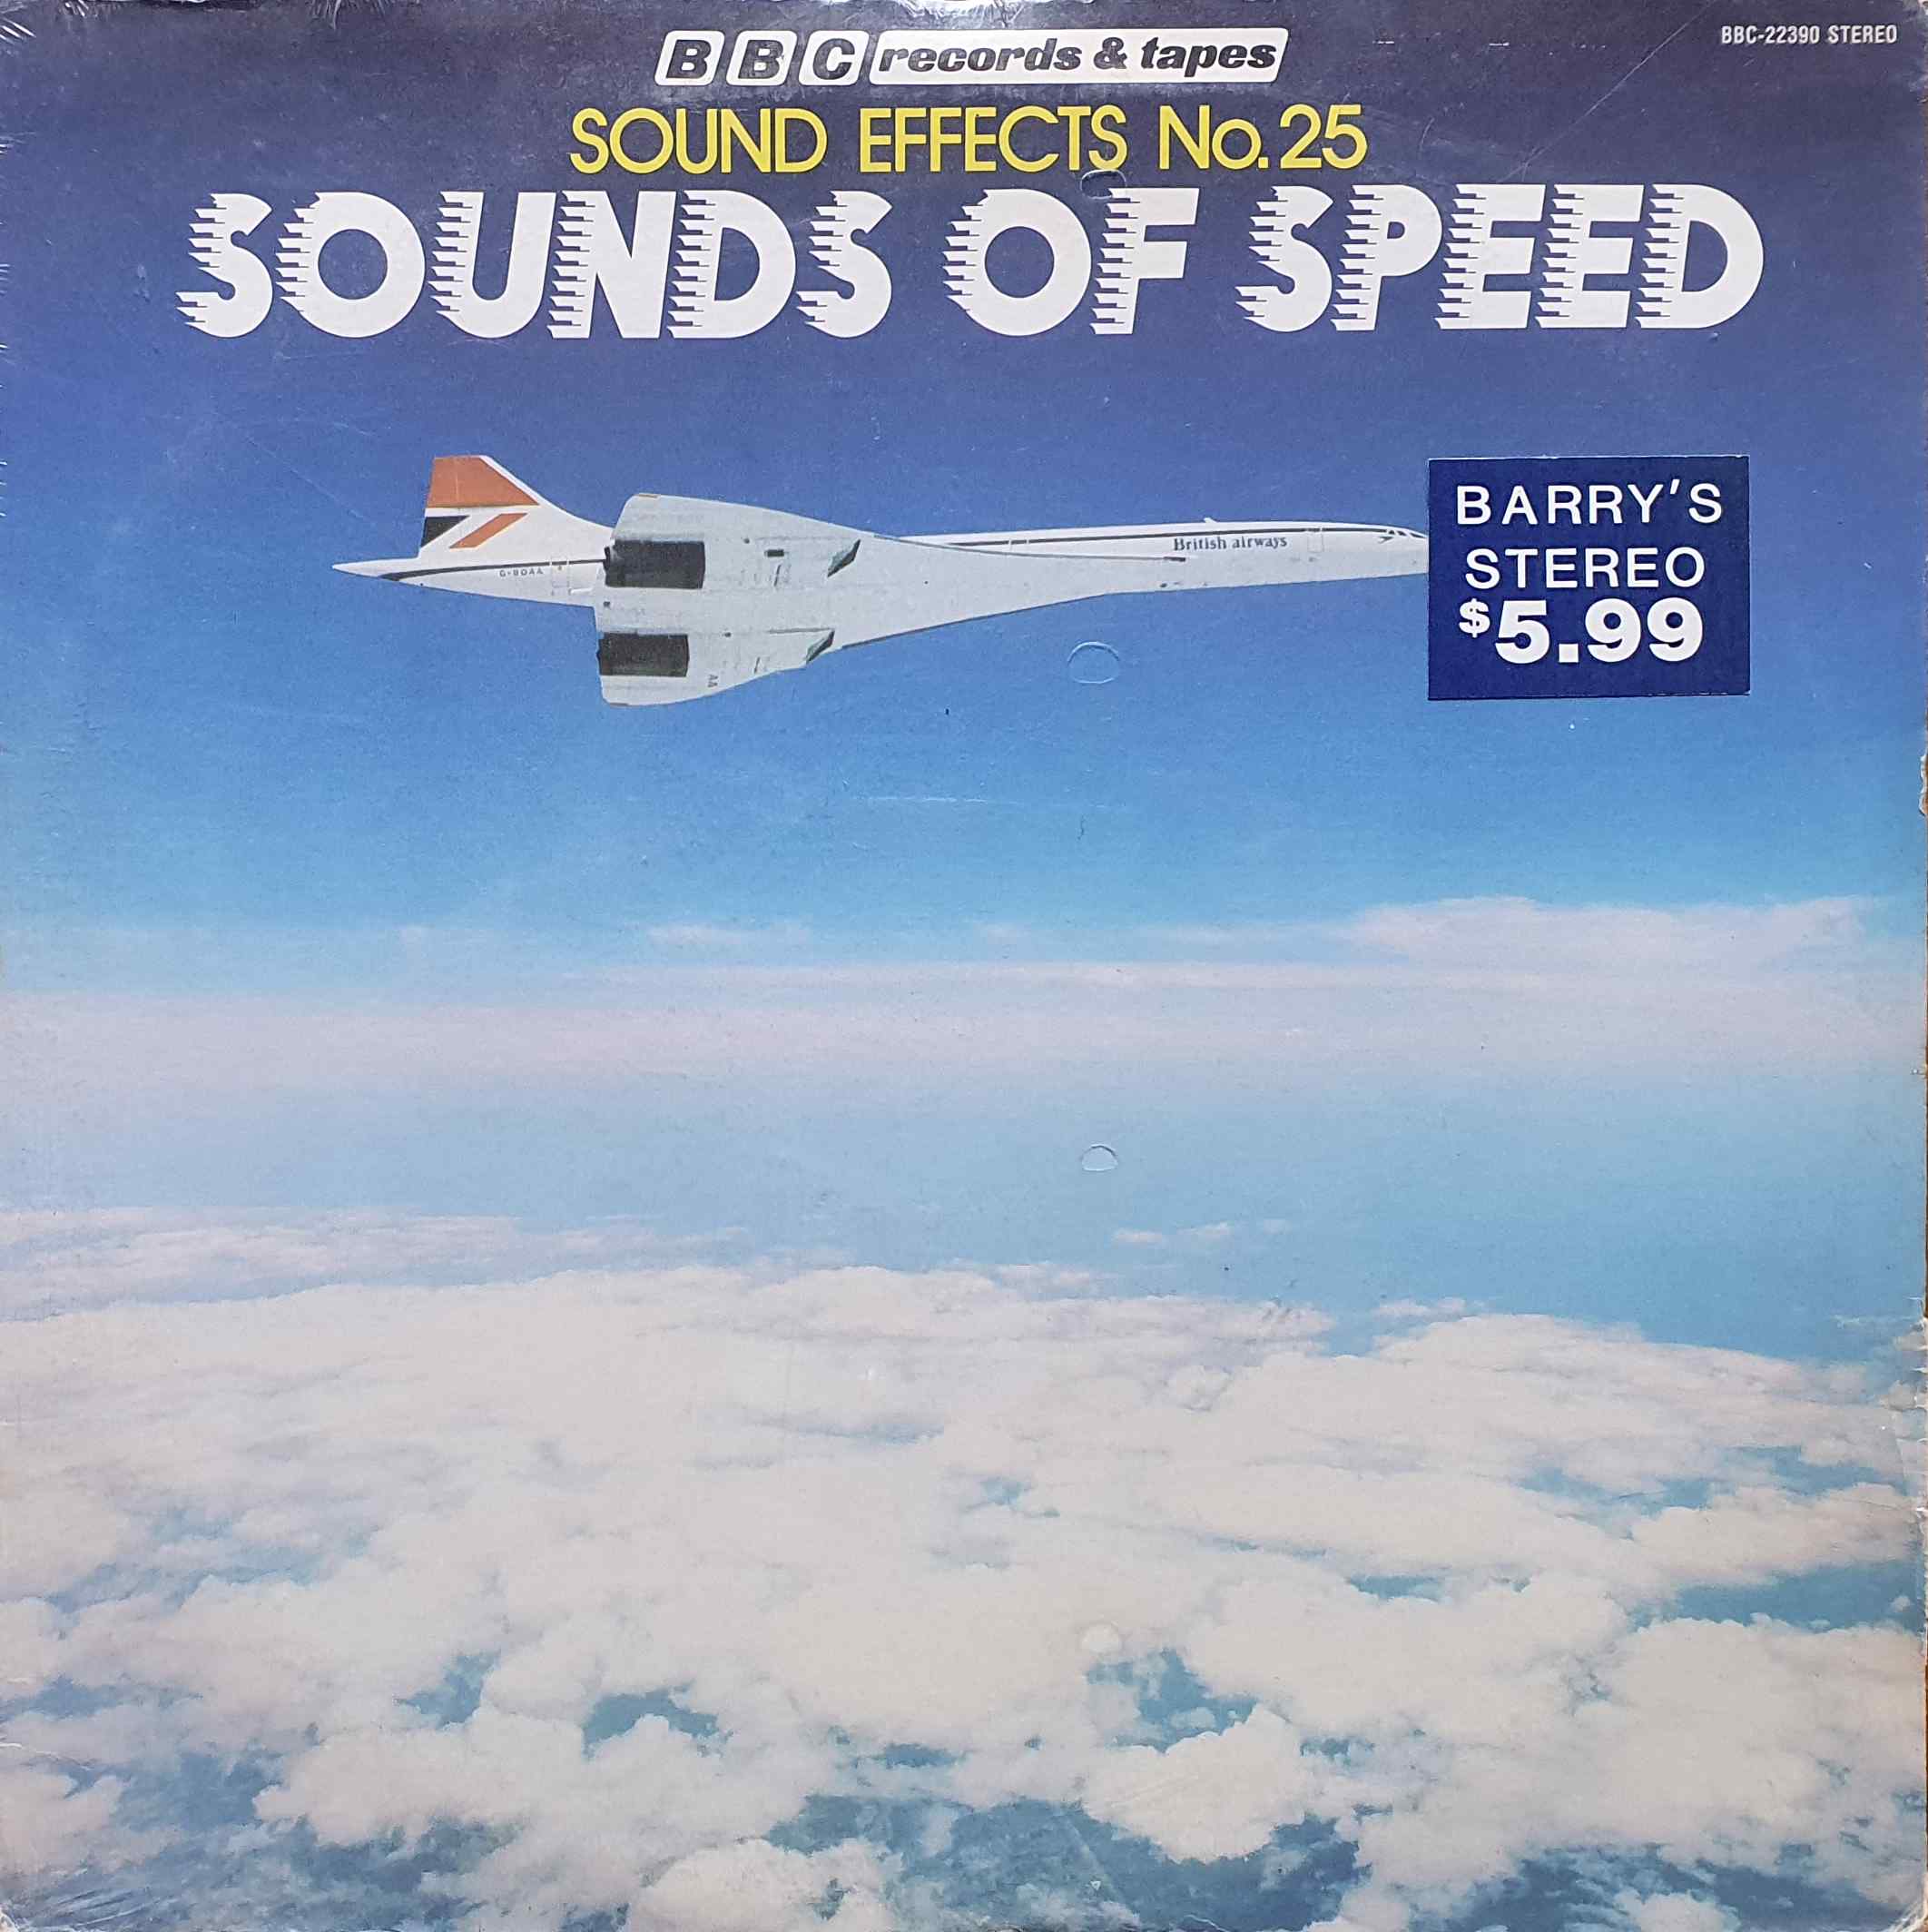 Picture of BBC - 22390 Sound effects no.25 - Sounds of speed (US import) by artist Various from the BBC albums - Records and Tapes library